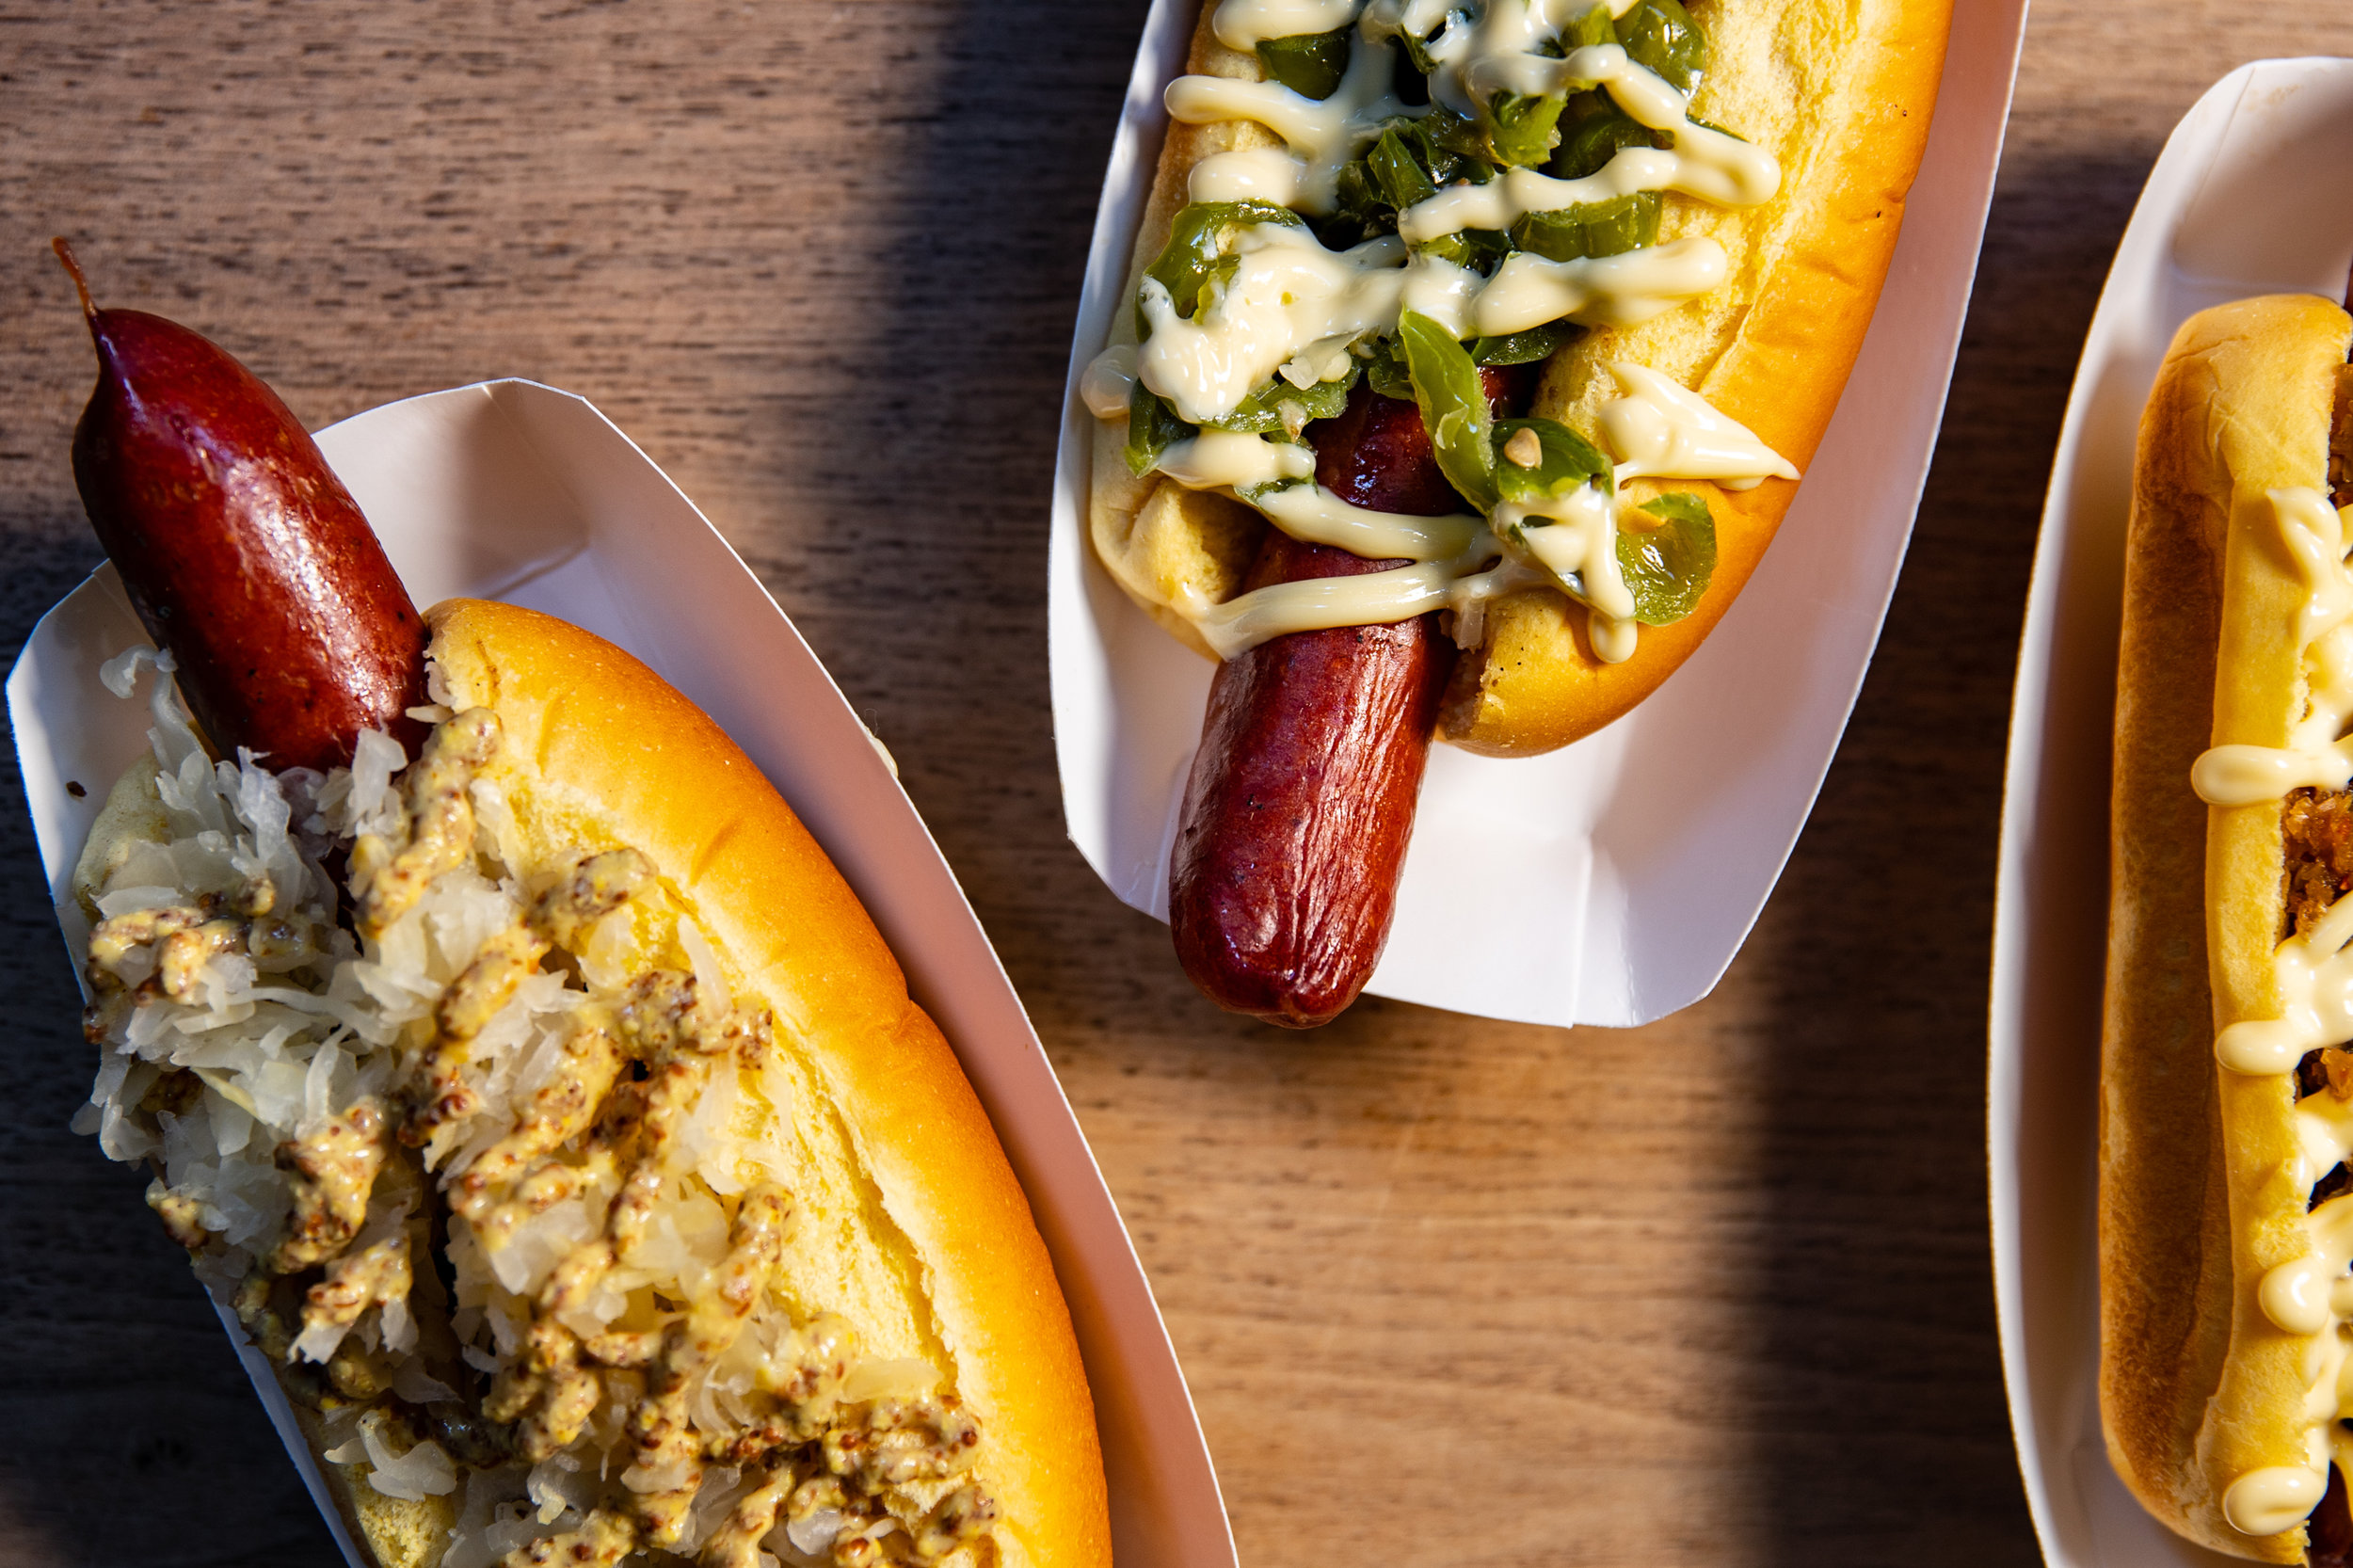 three hotdogs on a wood surface each covered in different toppings